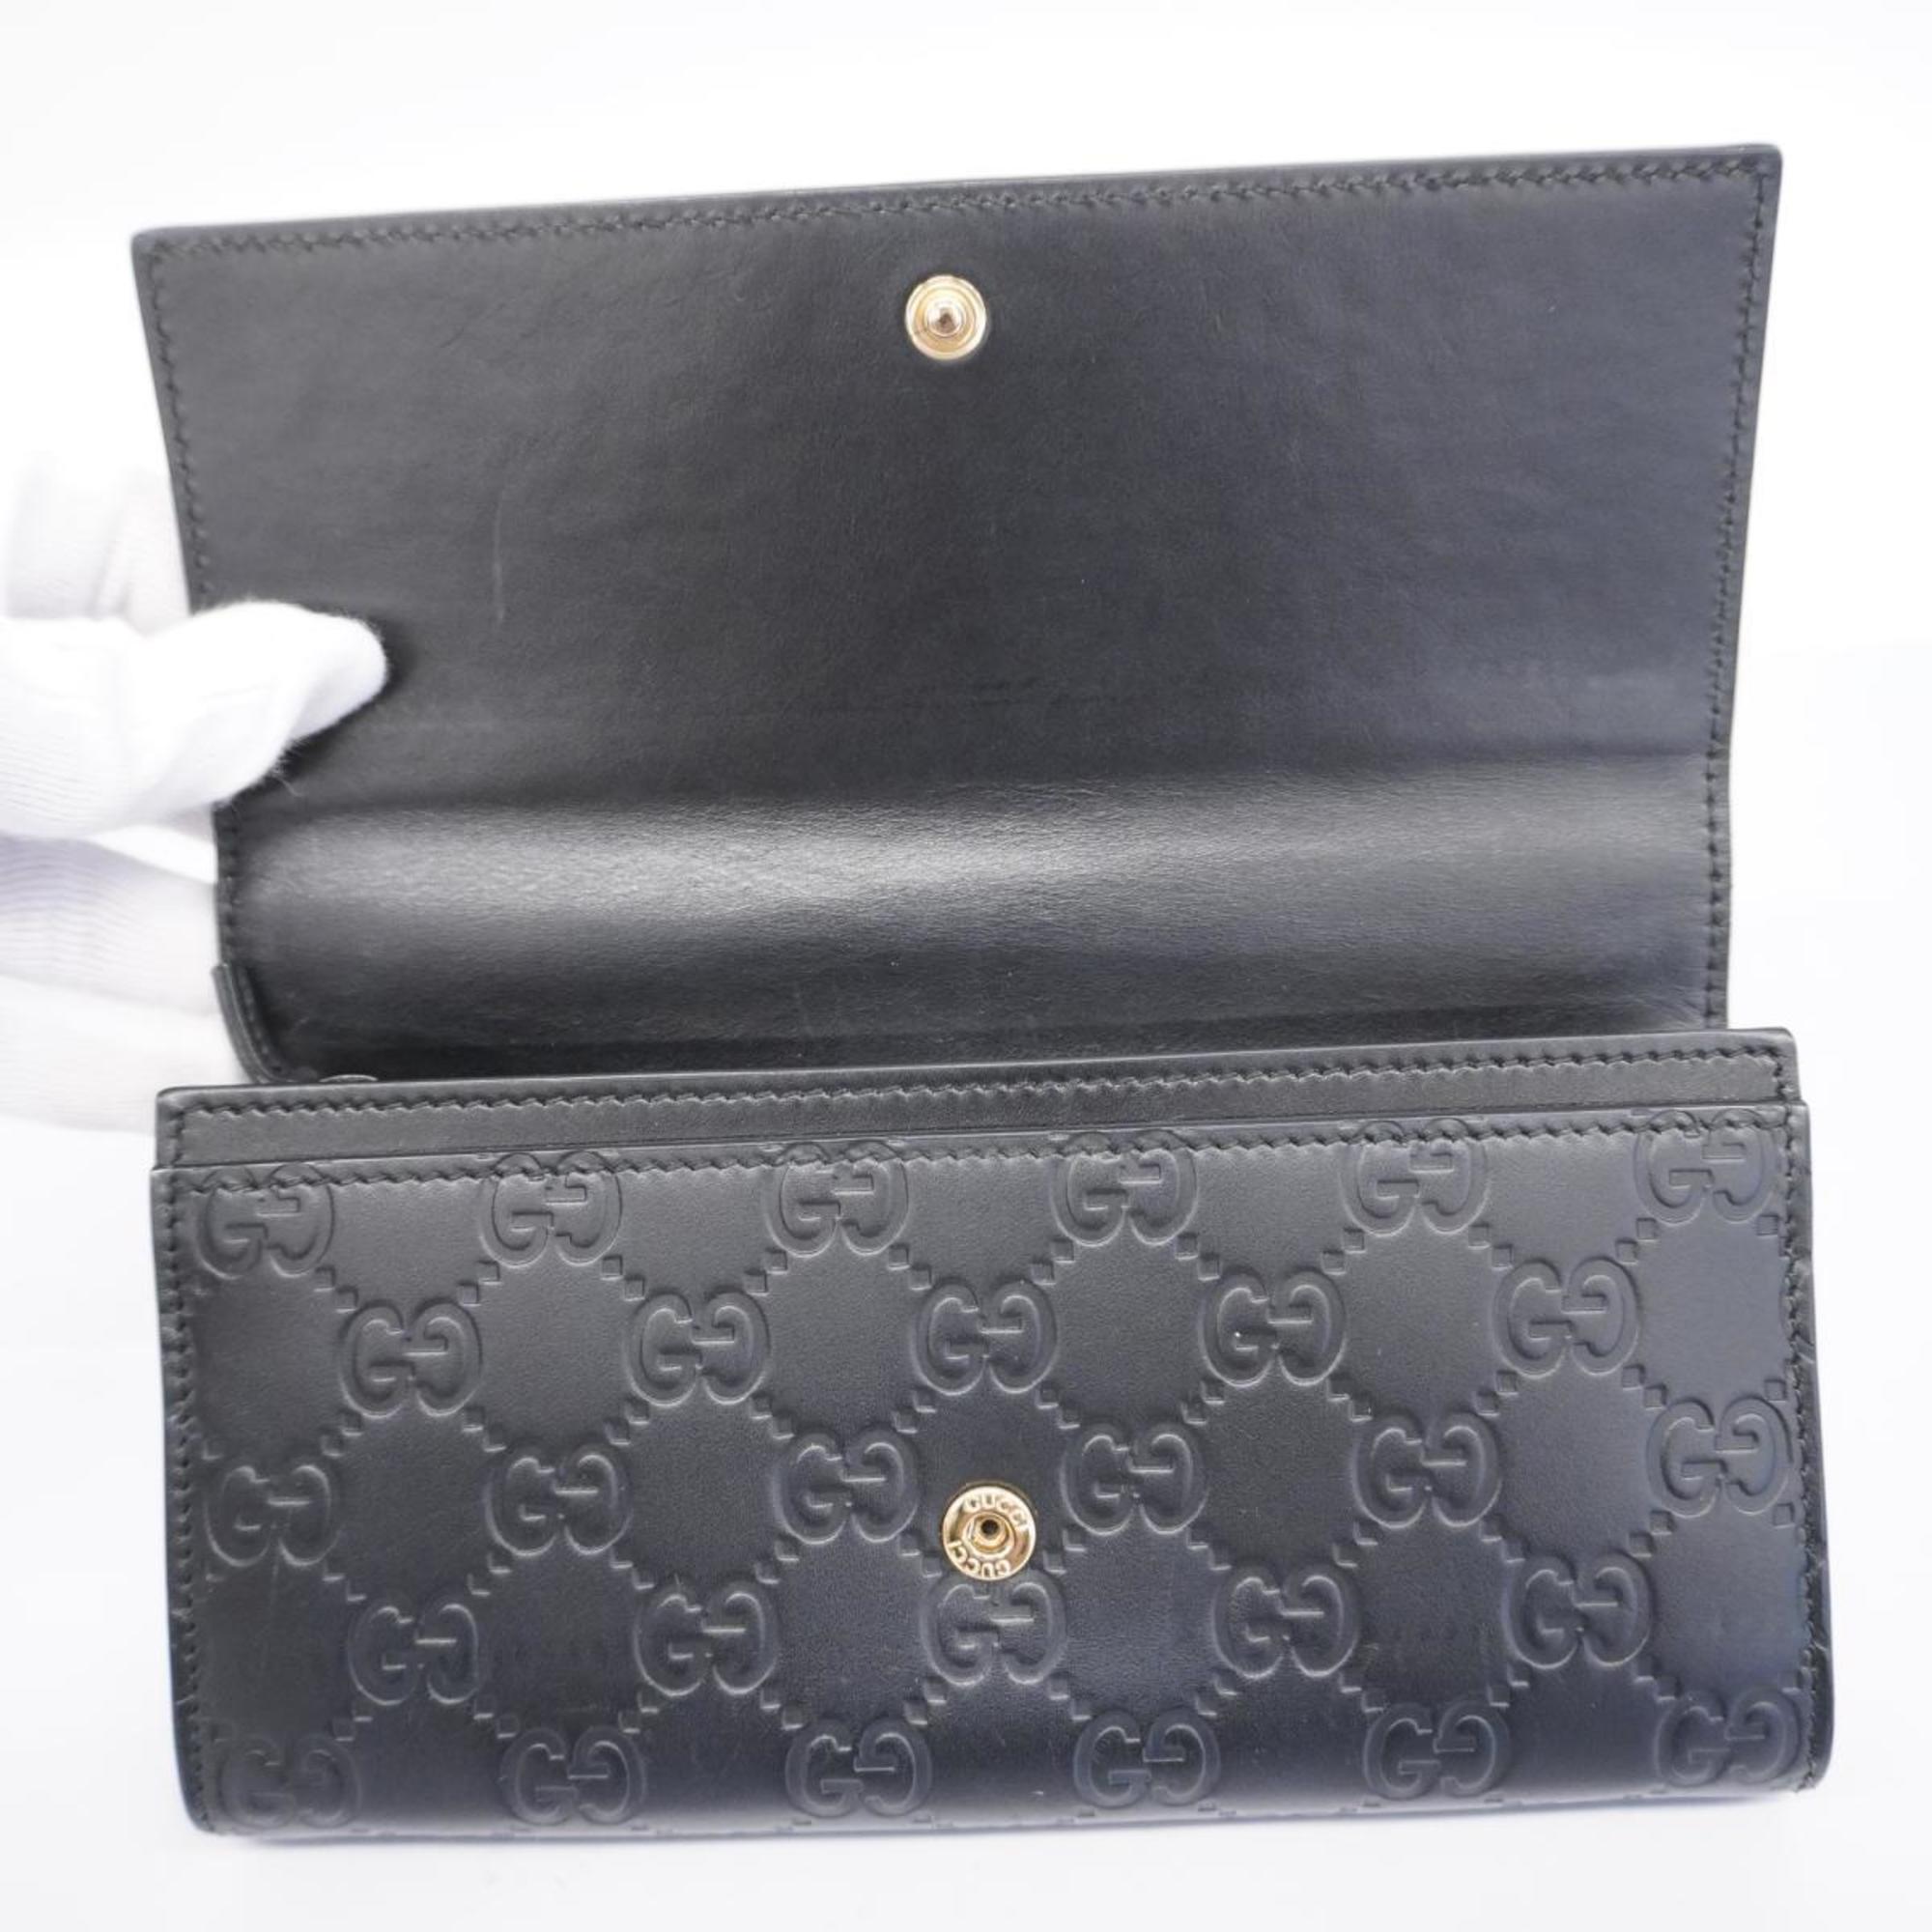 Gucci Long Wallet Guccissima 388679 Leather Black Champagne Women's